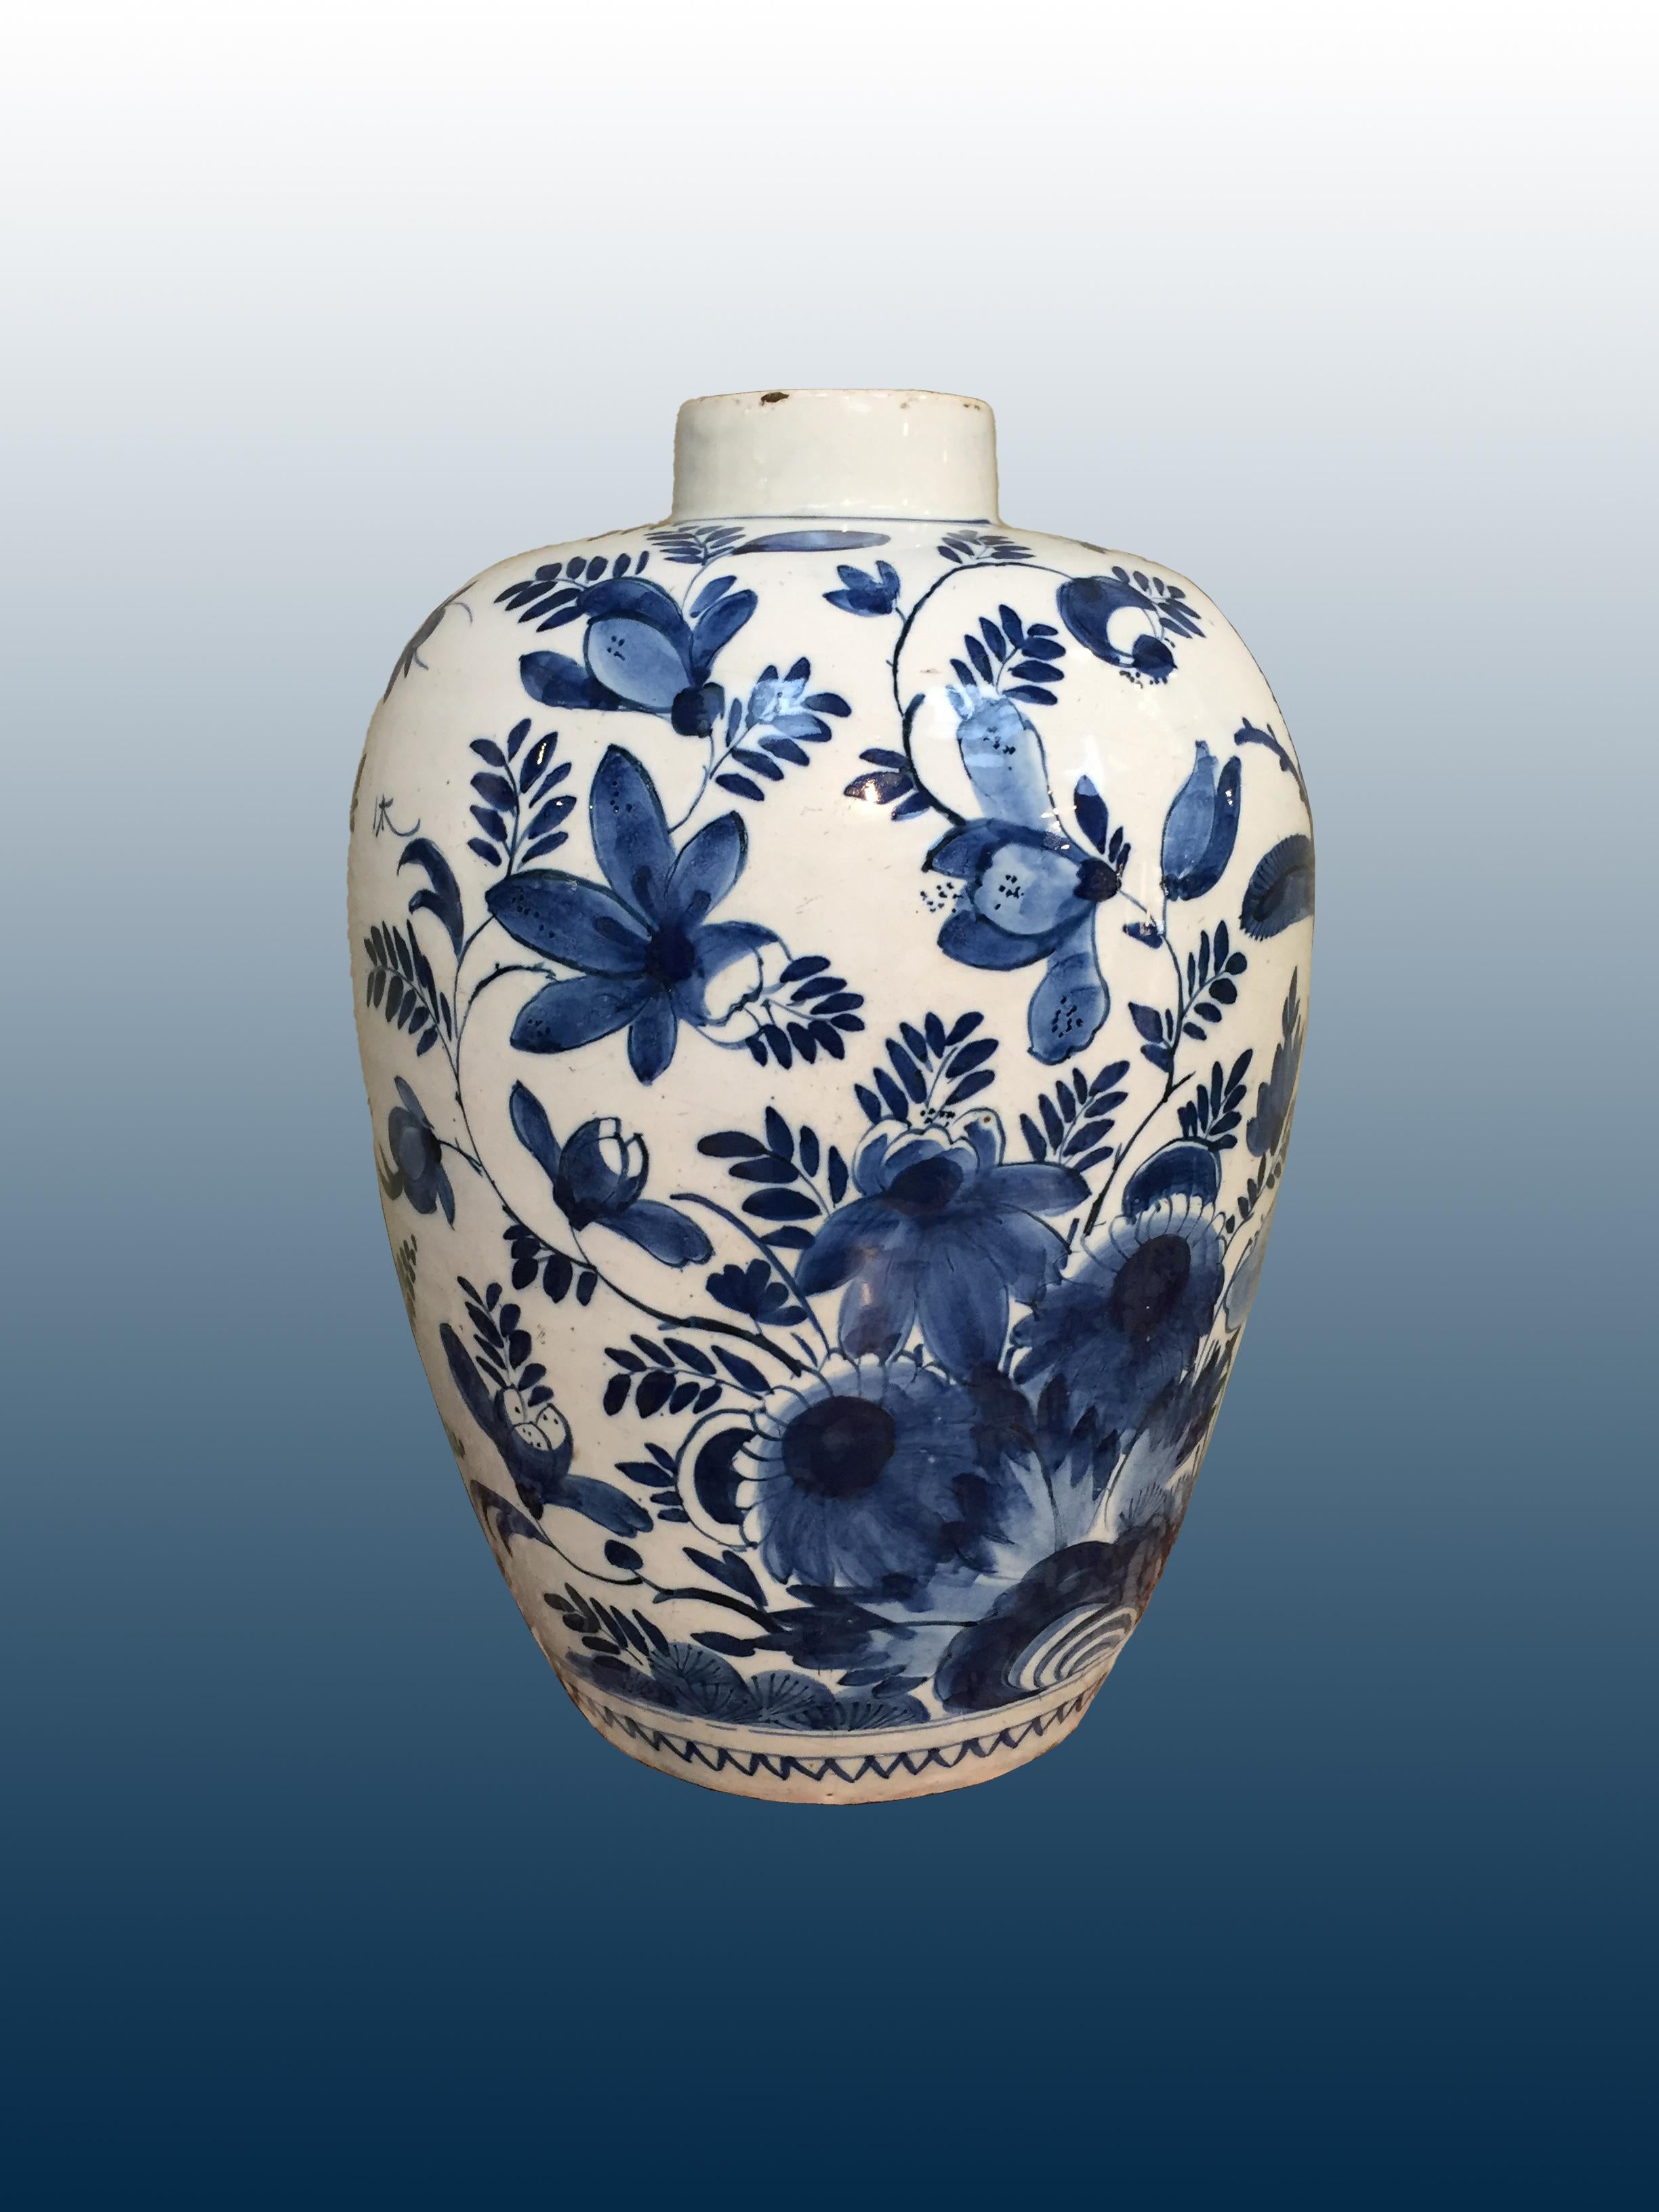 Hand-Painted 18th century Dutch Delft Vase with Peacock